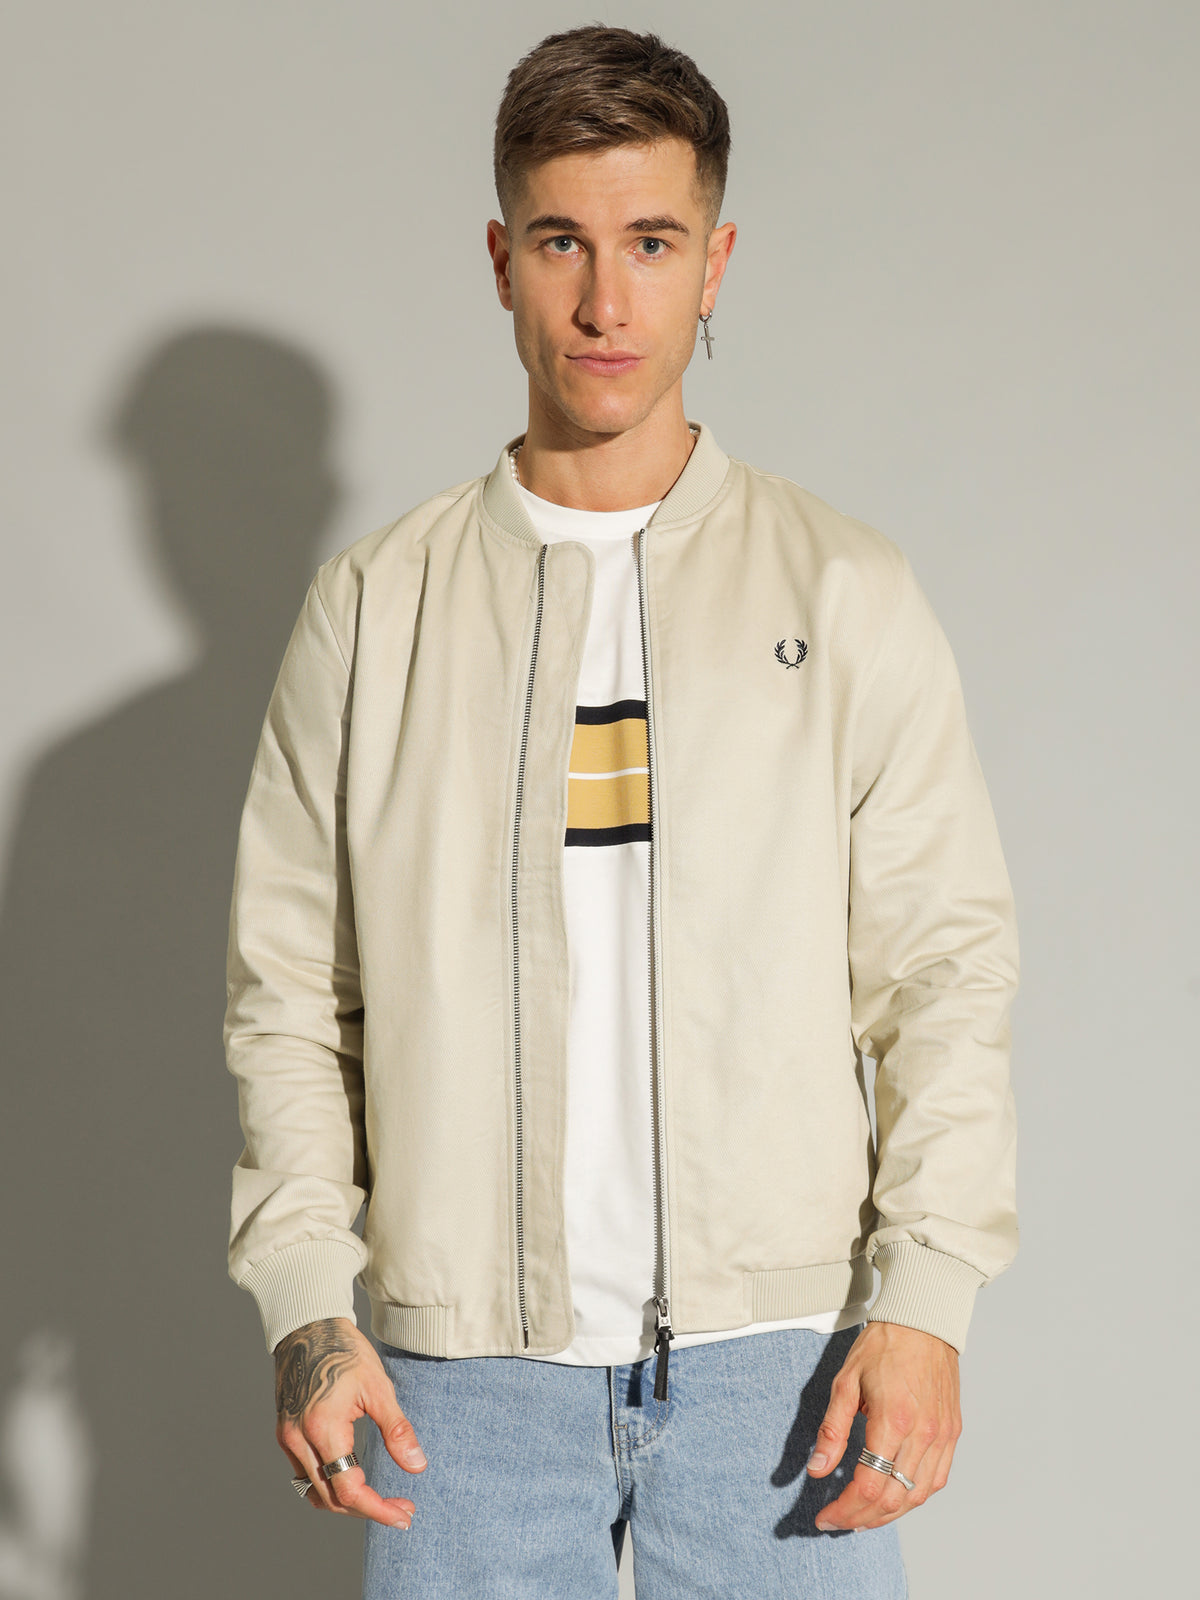 Twill Bomber Jacket in Oyster White